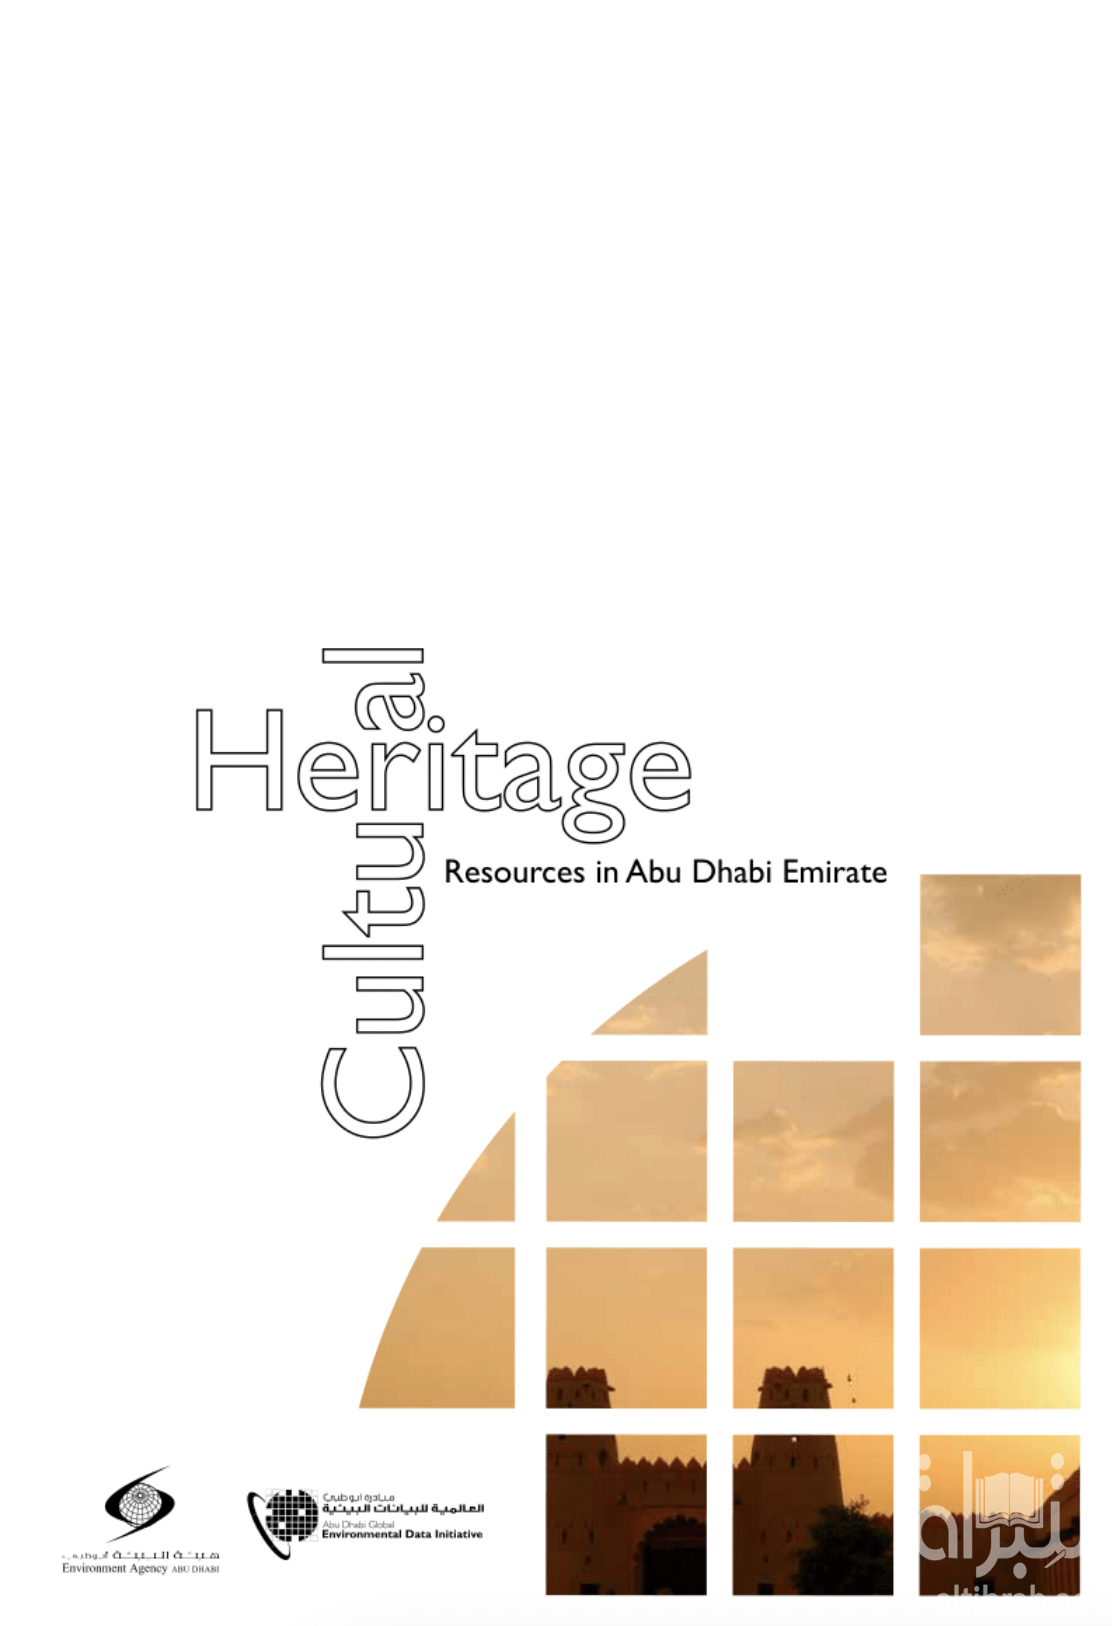 Cultural Heritage Resources in Abu Dhabi Emirate